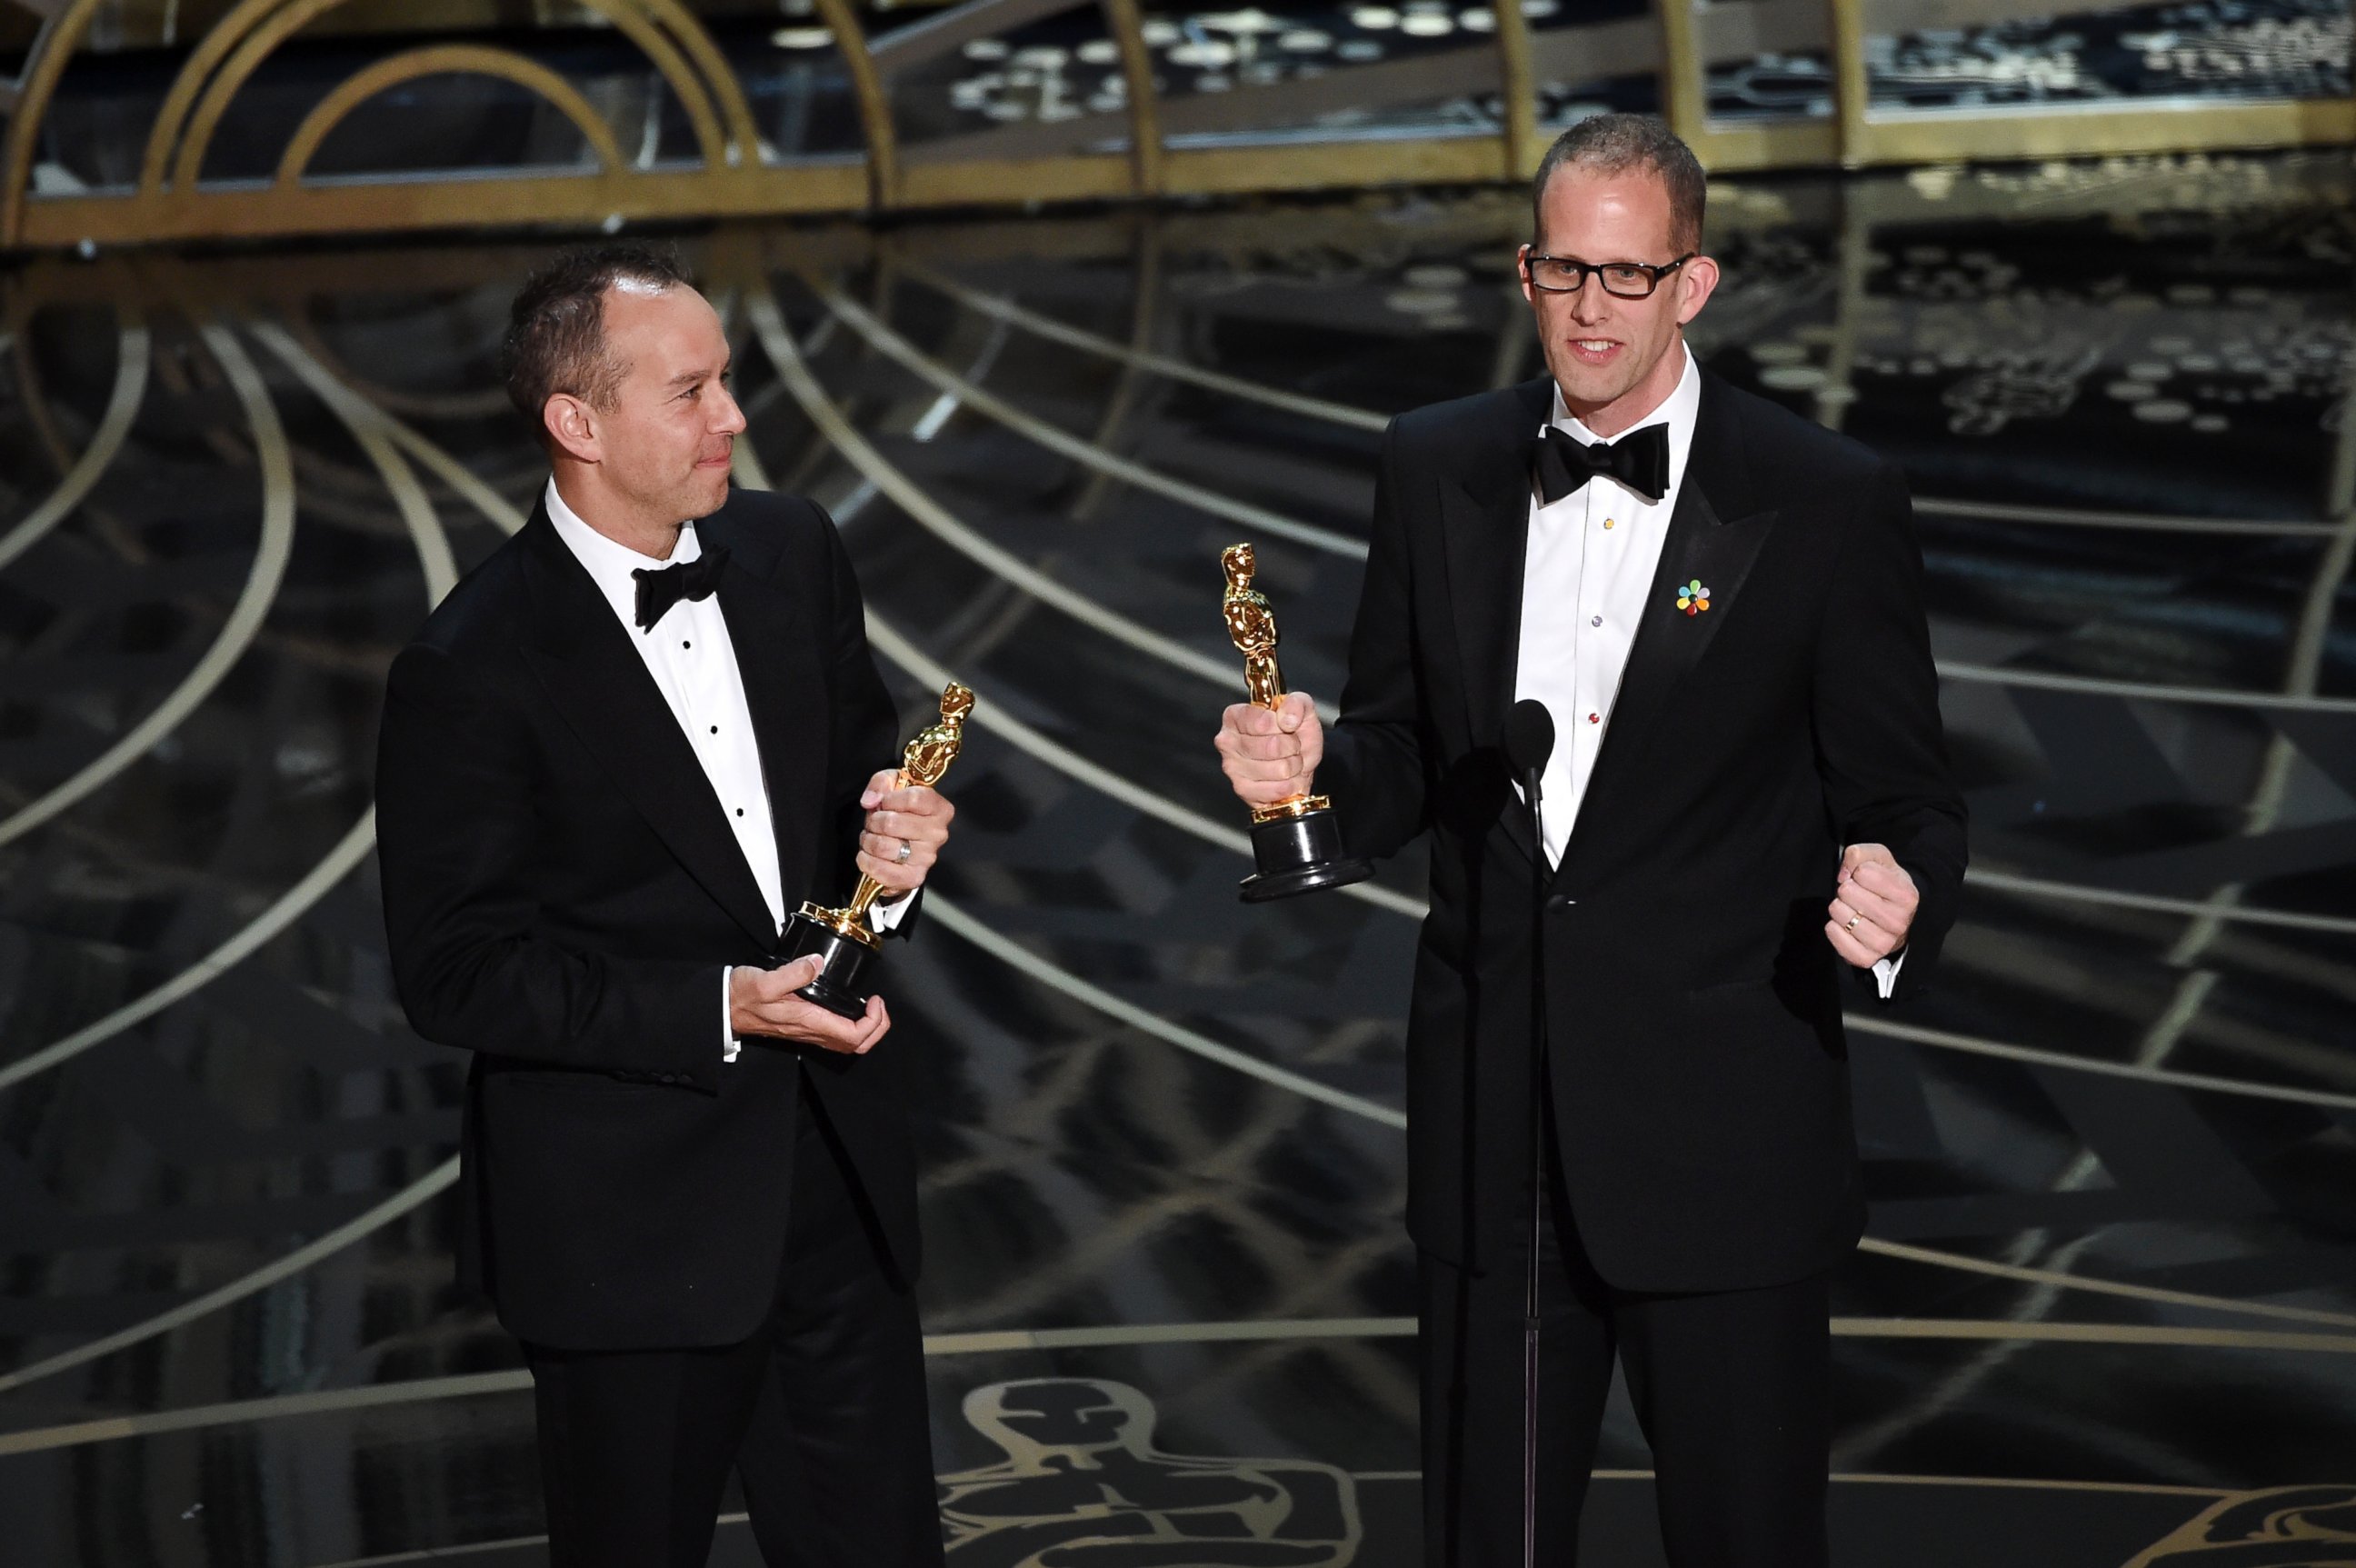 PHOTO: Jonas Rivera, left, and Pete Docter accept the Best Animated Feature Film award for 'Inside Out' onstage during the 88th Annual Academy Awards at the Dolby Theater, Feb. 28, 2016 in Hollywood, California.